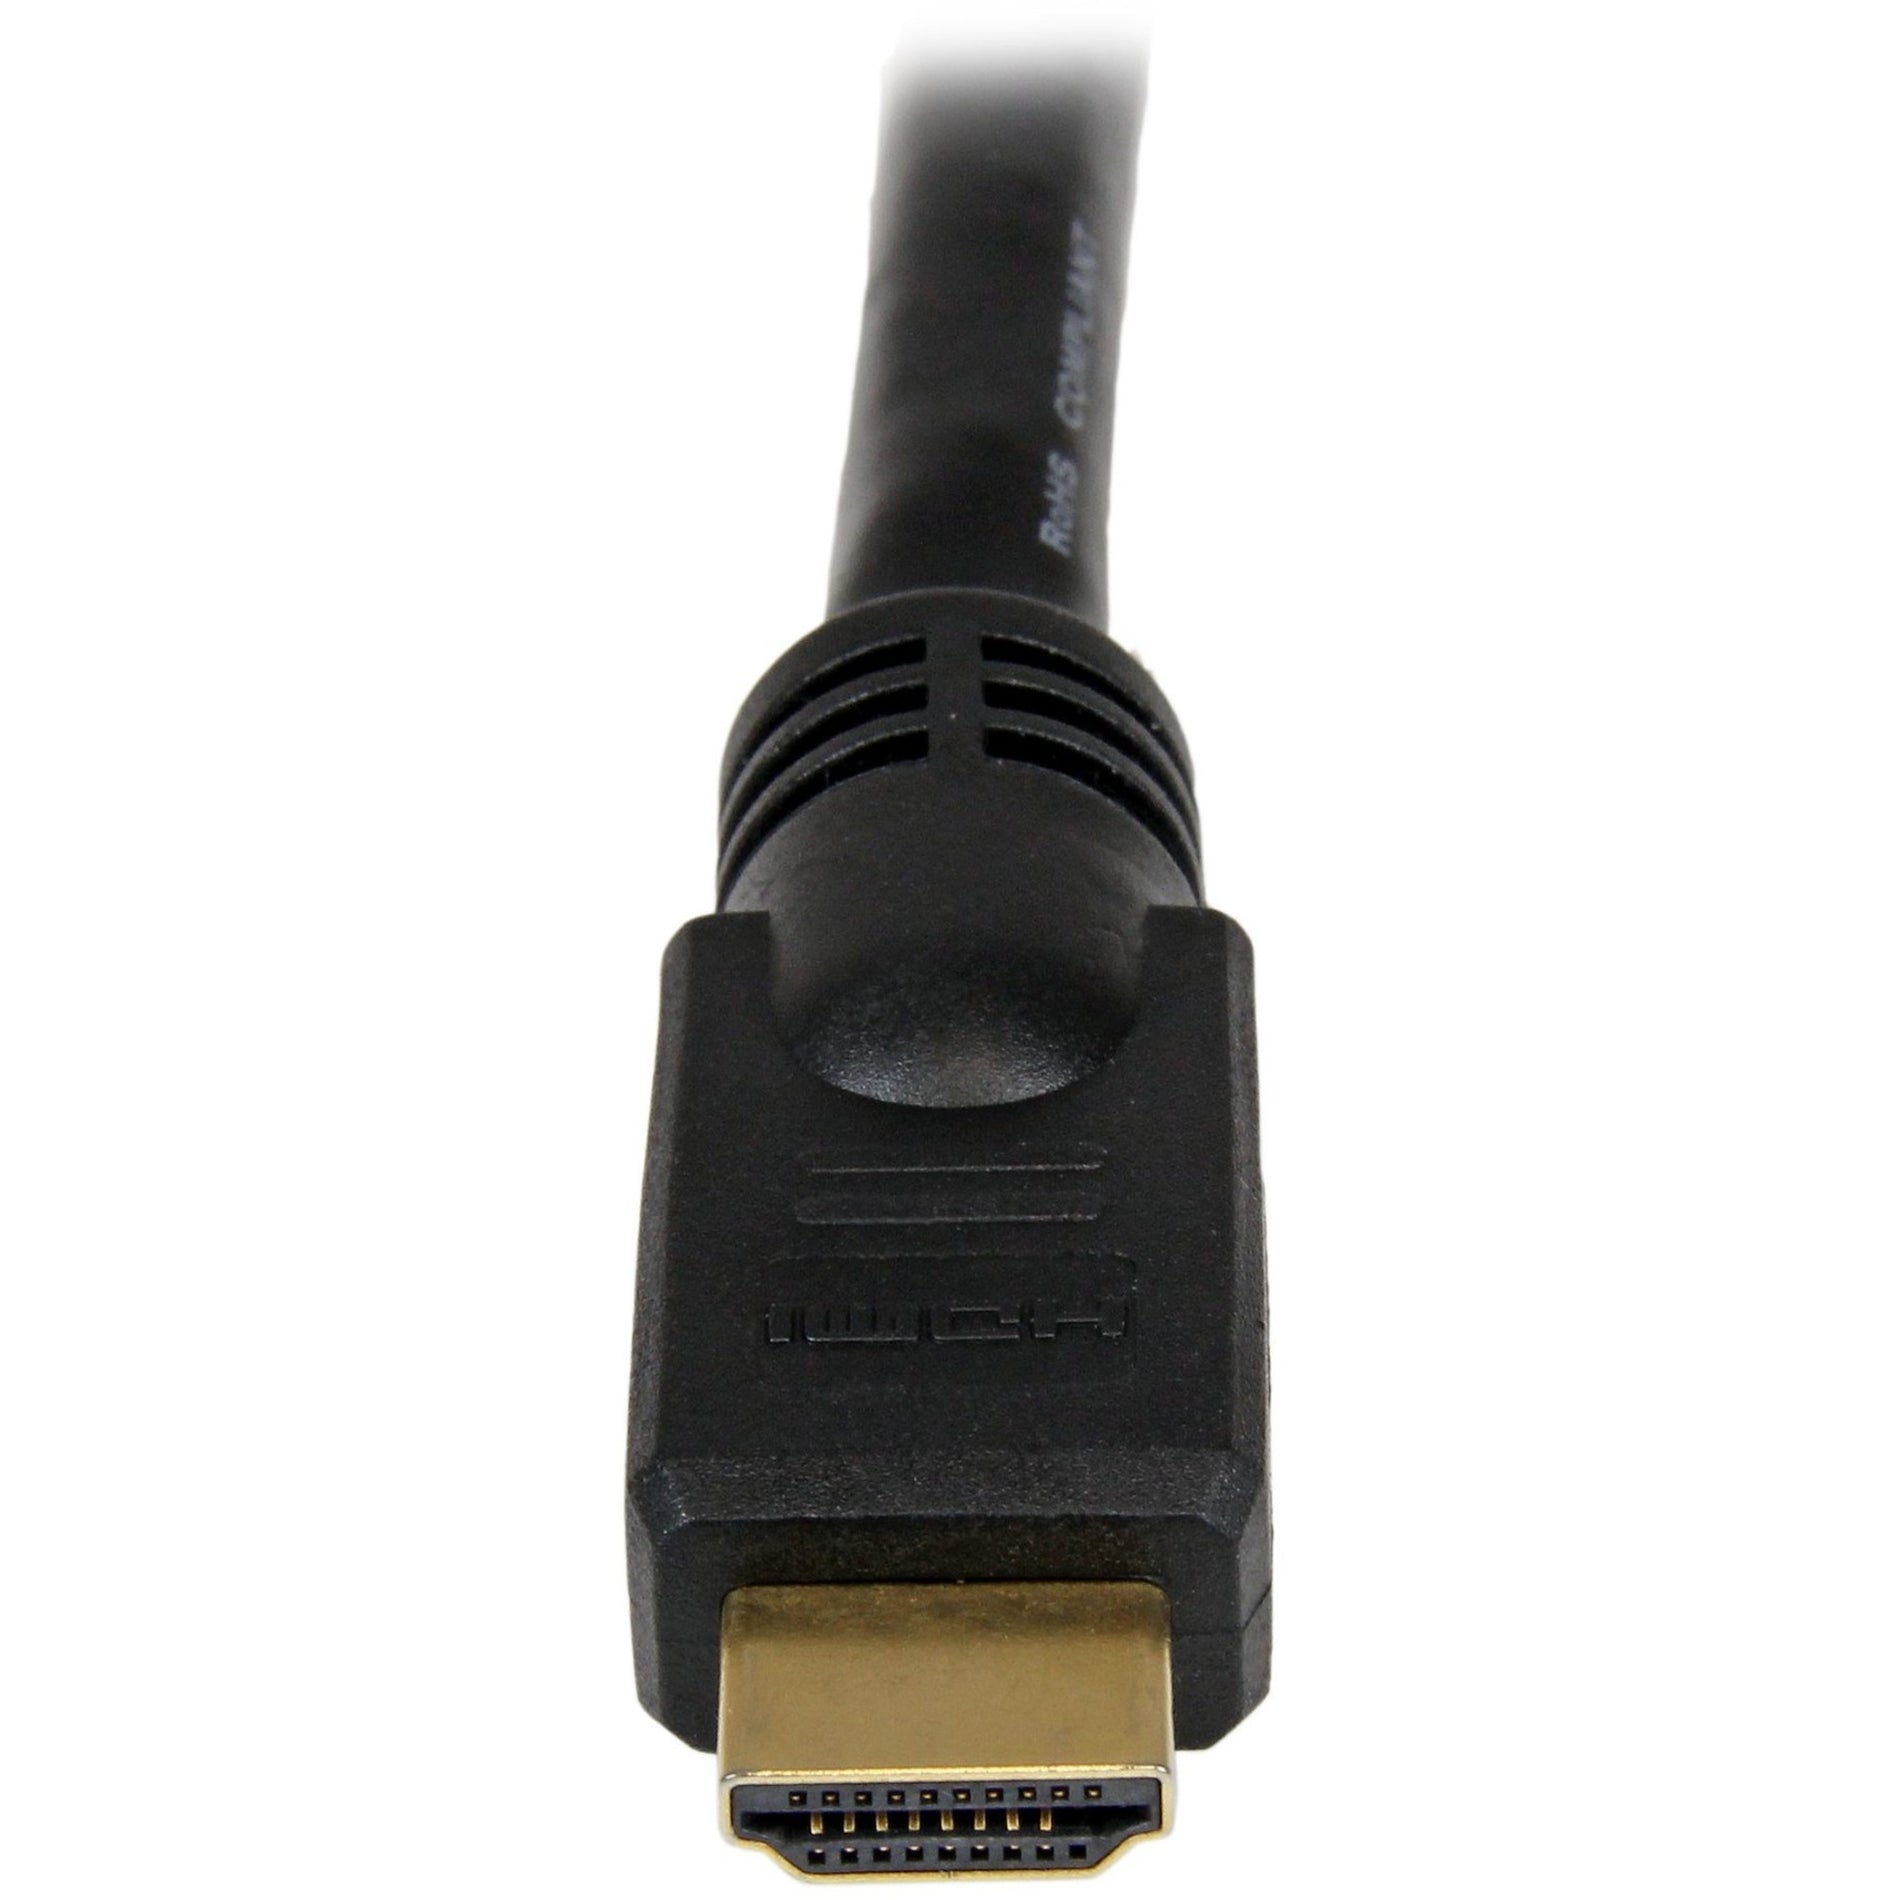 StarTech.com HDMM40 40 ft High Speed HDMI Cable M/M - 4K @ 30Hz, No Signal Booster Required